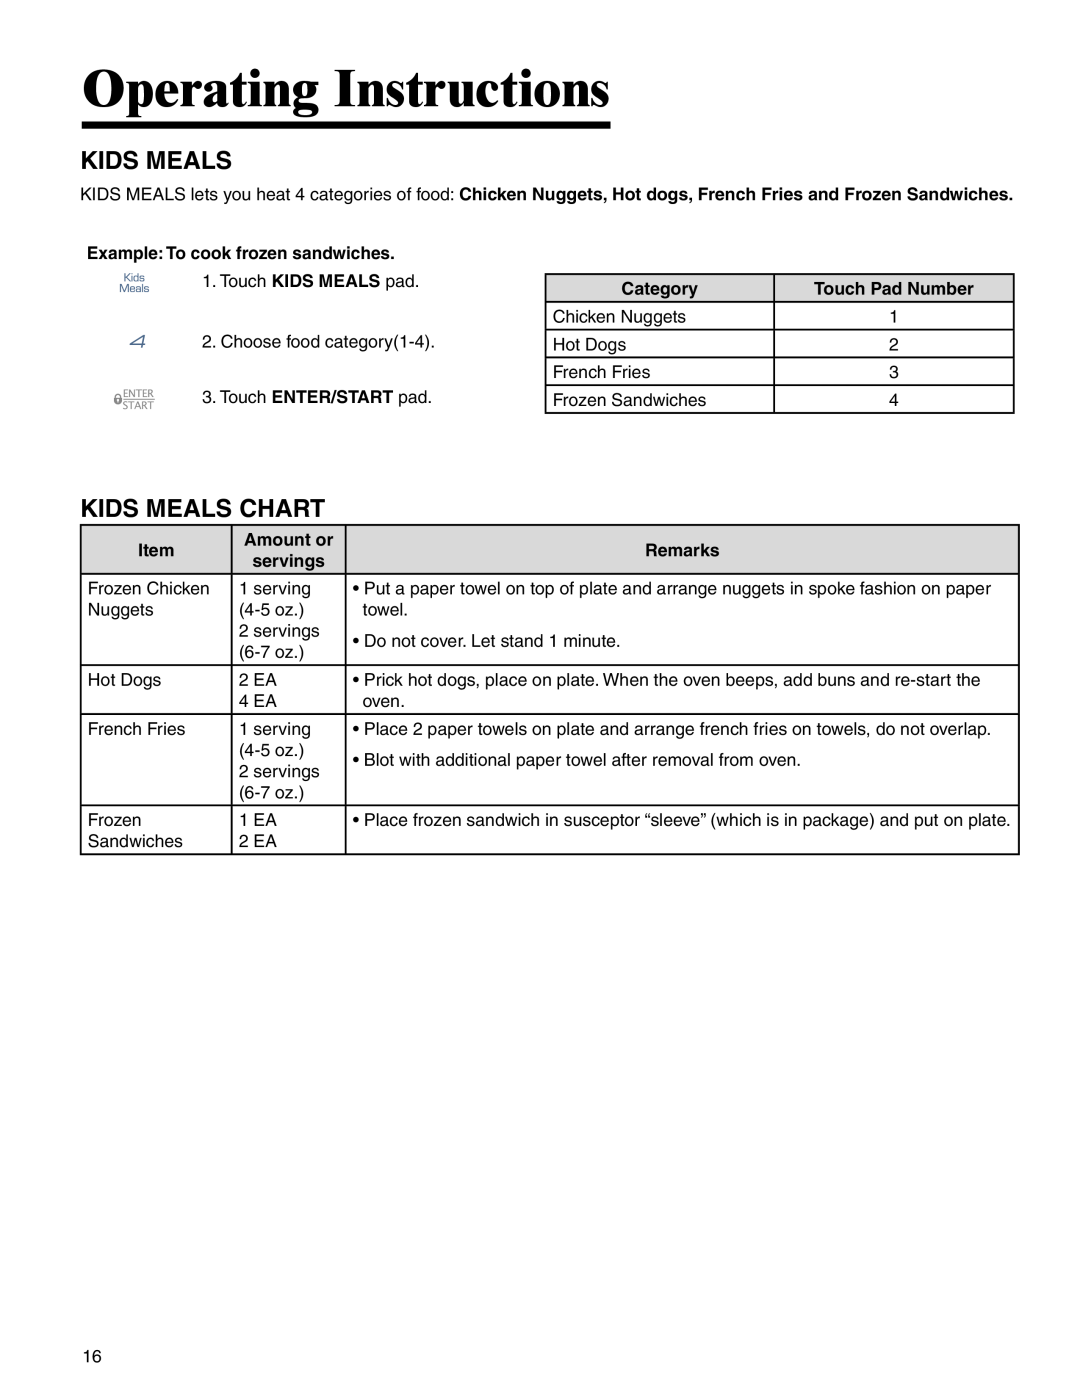 Maytag MMV4205BA Operating Instructions, Kids Meals Chart, Example: To cook frozen sandwiches, Category, Item, Remarks 